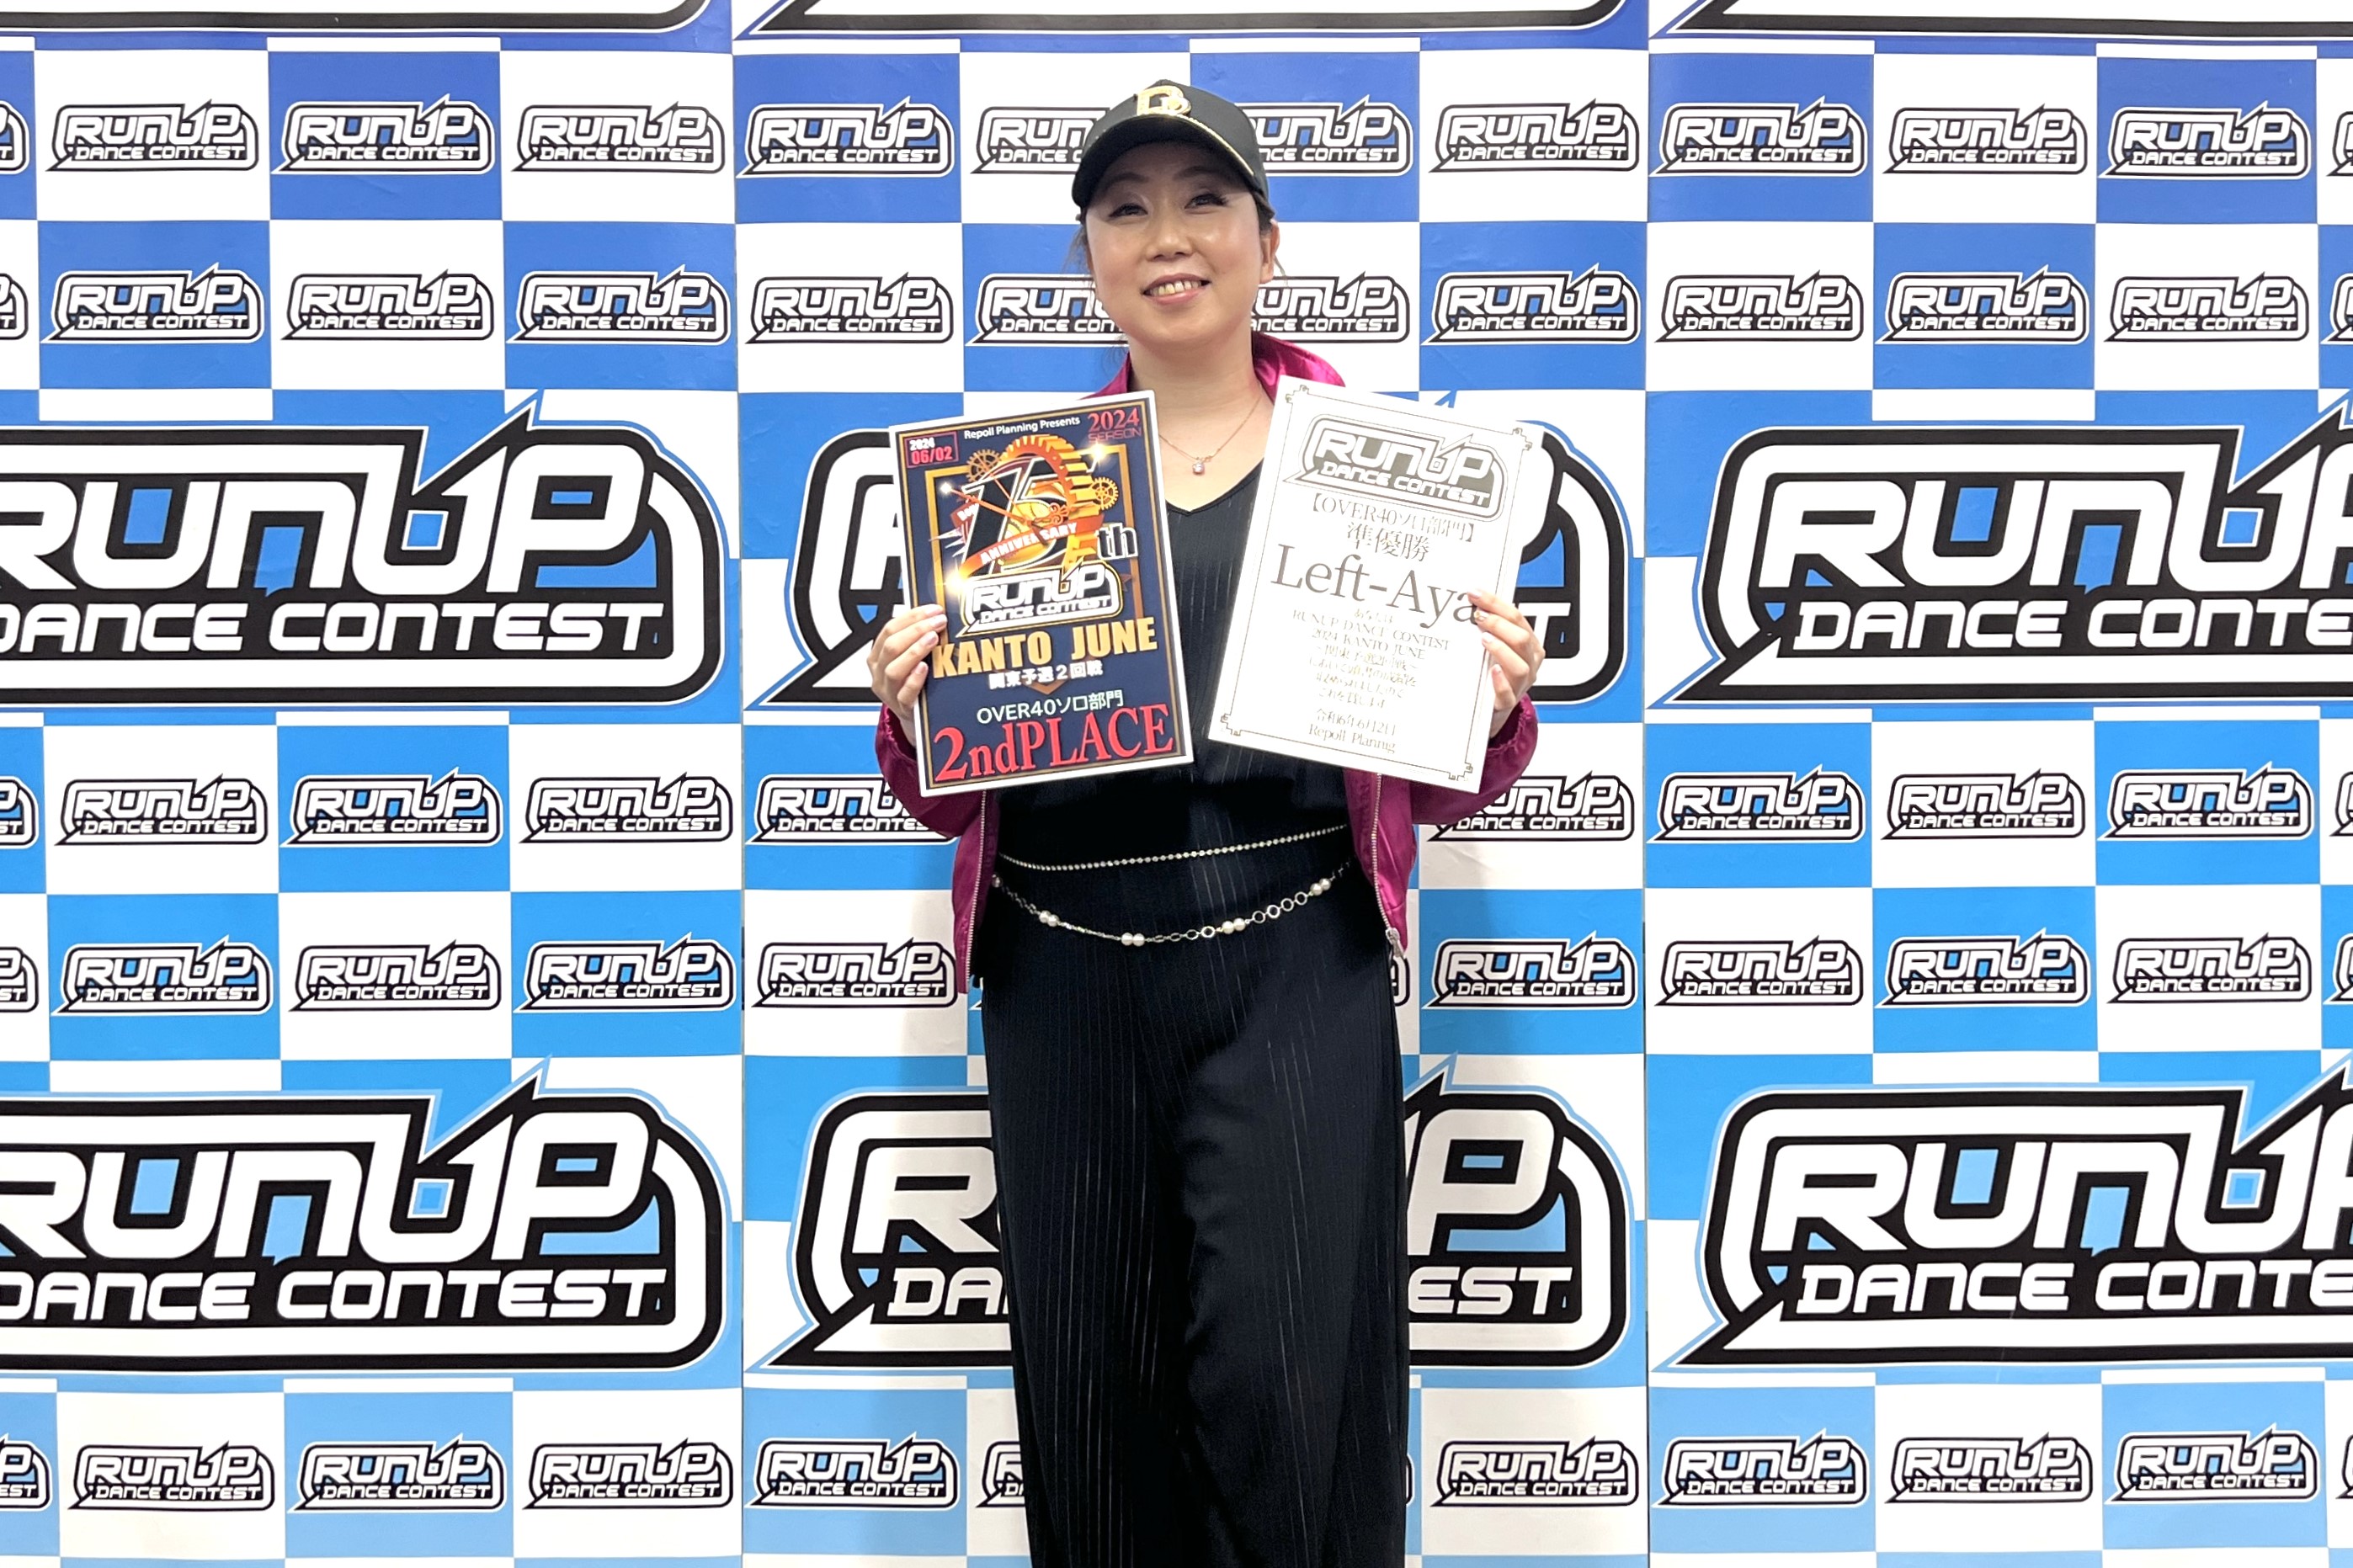 RUNUP 2024 KANTO JUNE OVER40ソロ 準優勝 Left-Aya